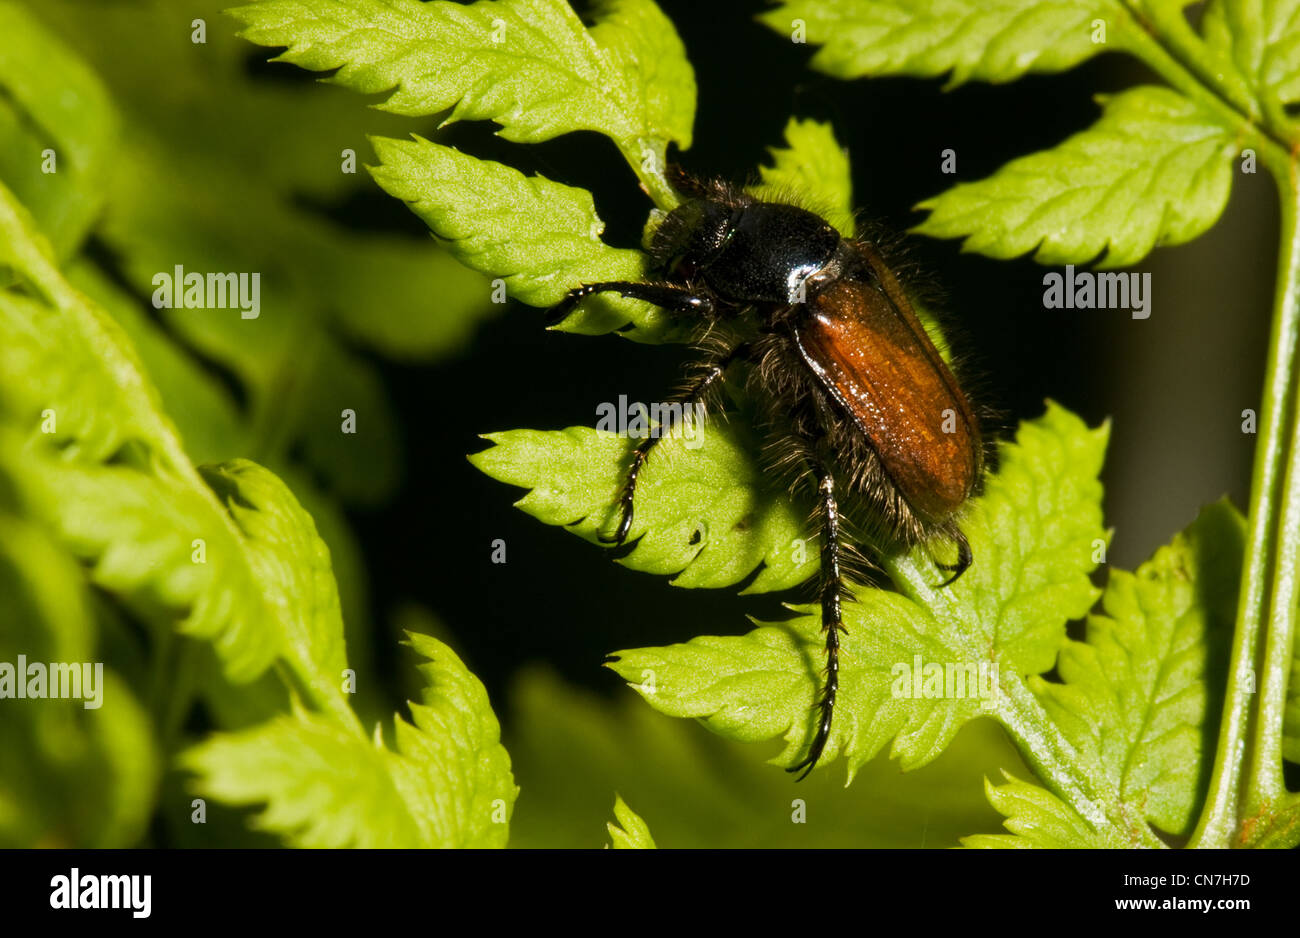 Garden Chafer (Phyllopertha horticola) on the leaf of a Fern. Stock Photo